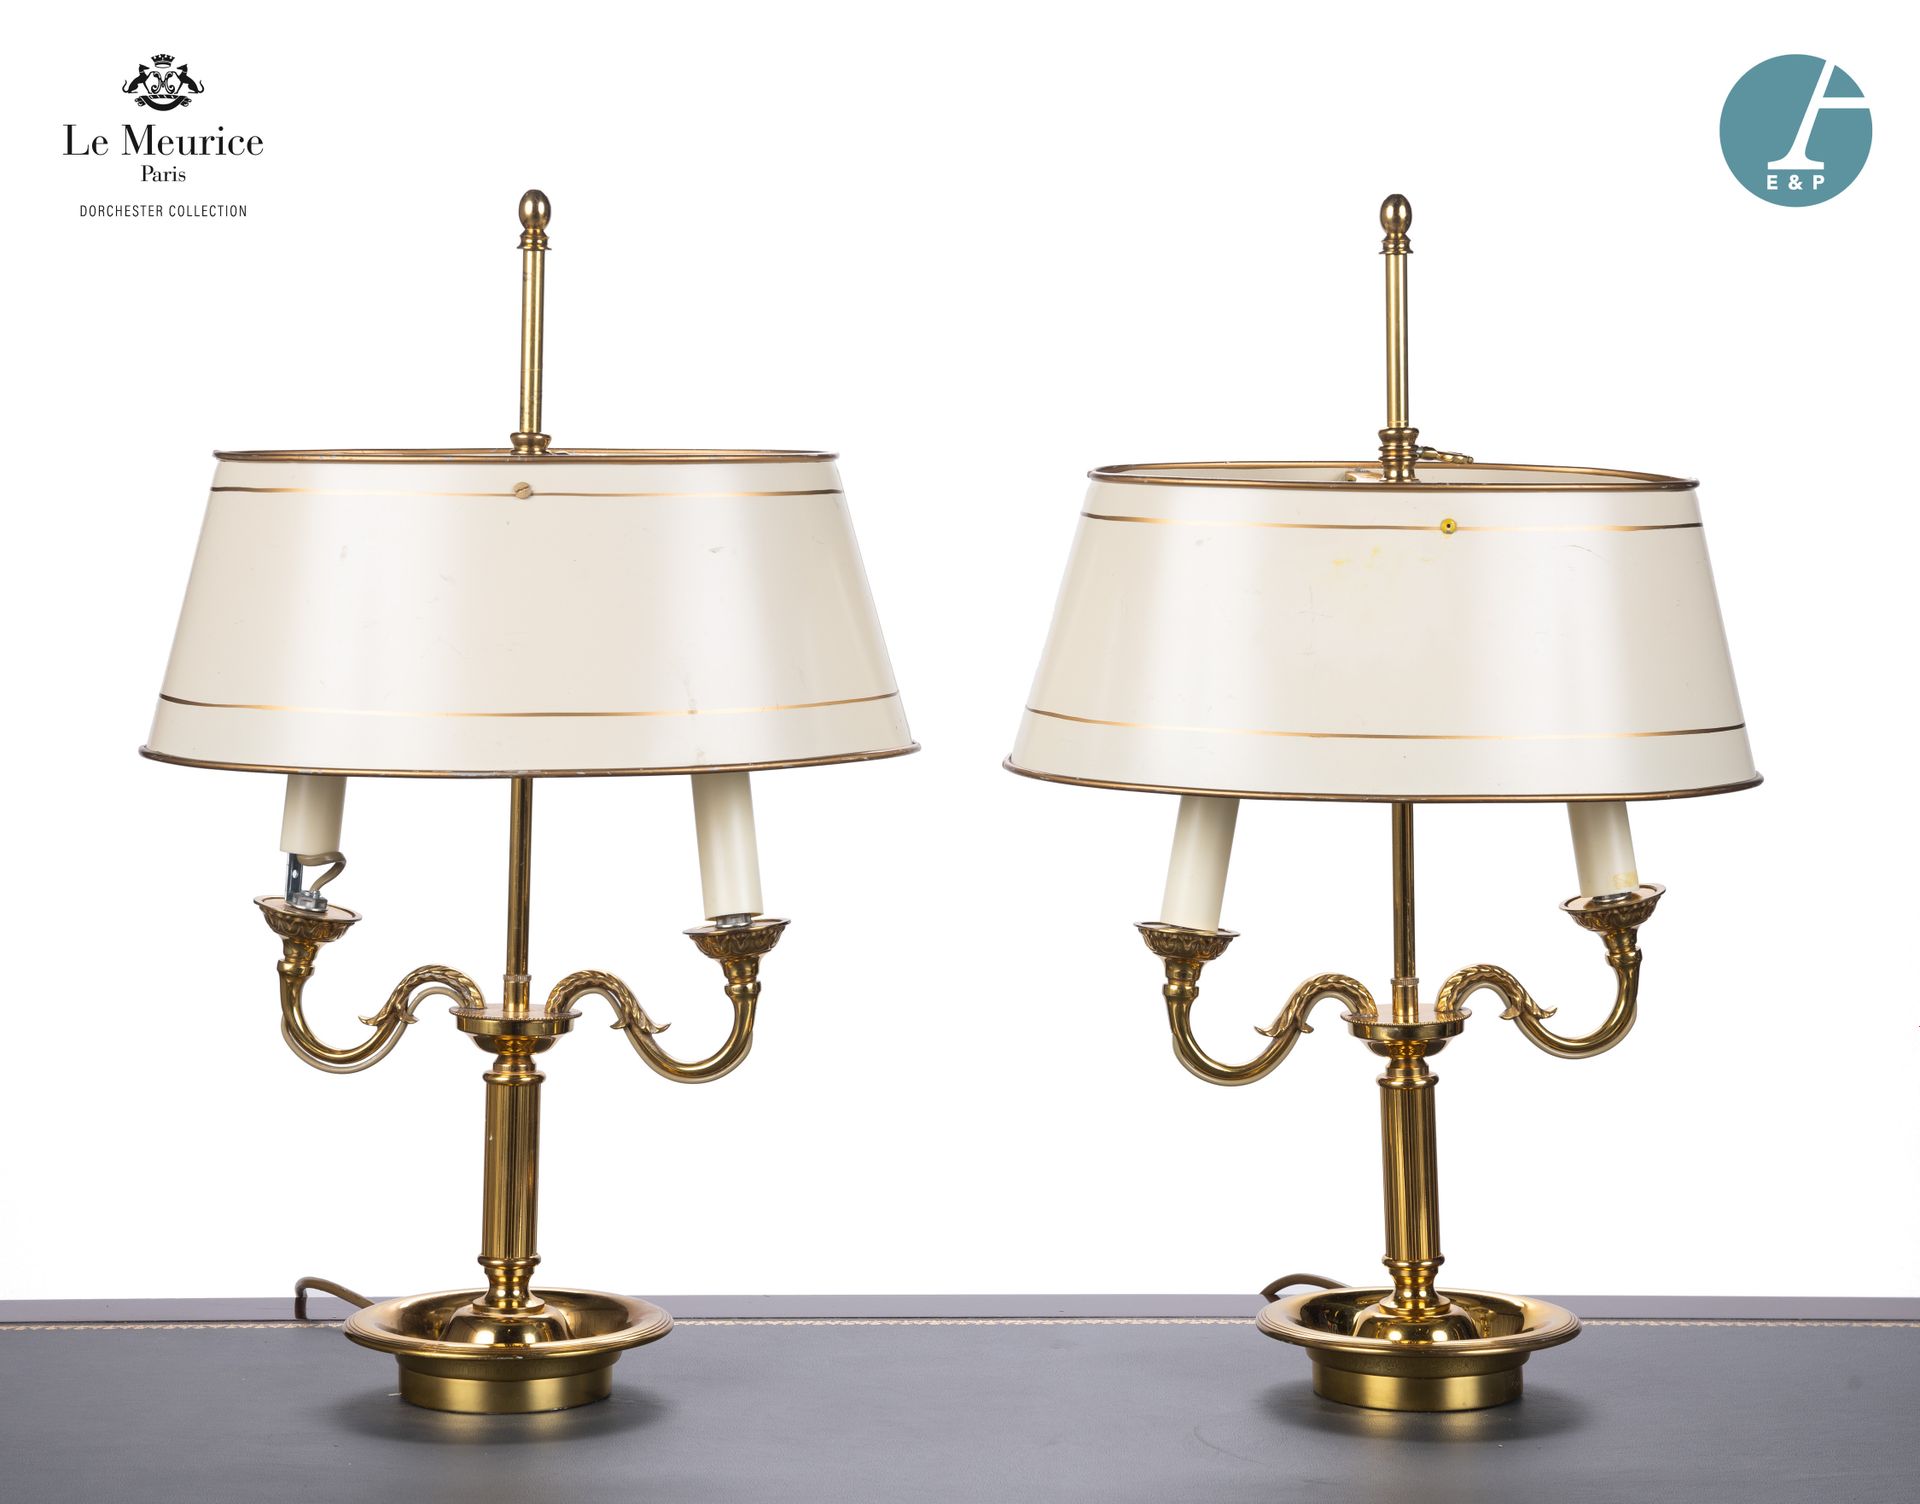 Null From Hôtel Le Meurice.
Pair of gilded metal hot-water bottle lamps with two&hellip;